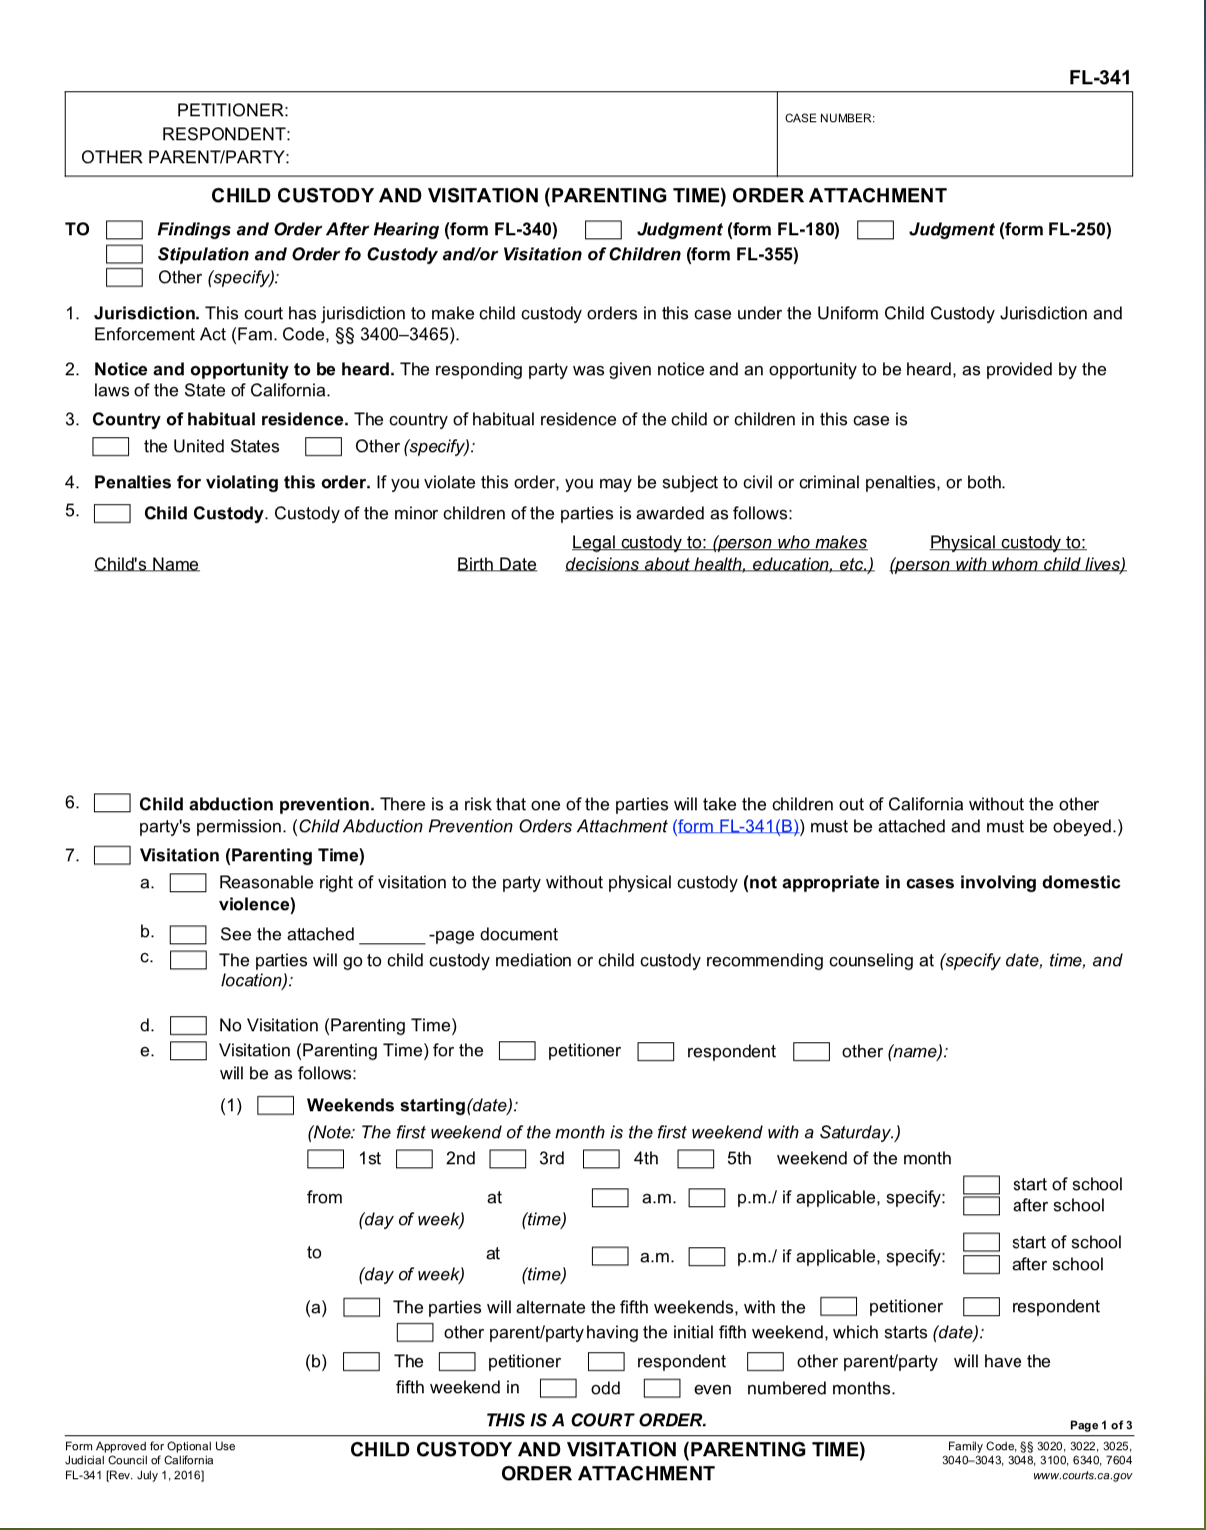 FL-341 Child Custody and Visitation (Parenting Time) Order Attachment.